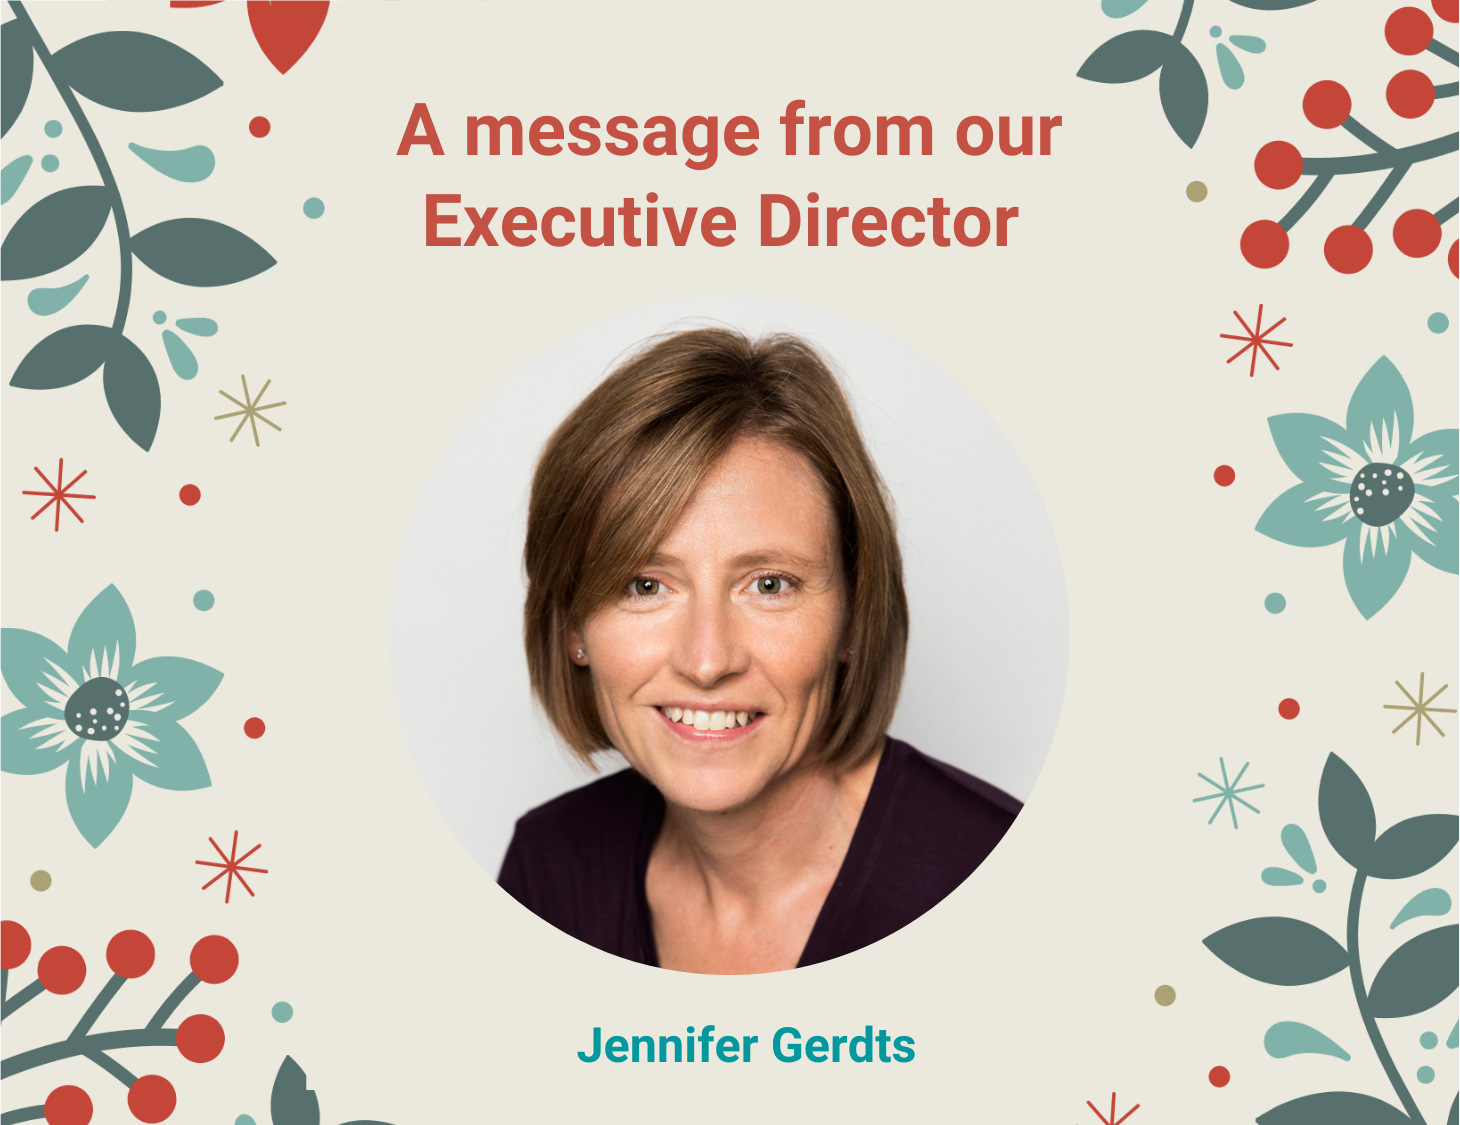 A message from our Executive Director Jennifer Gerdts